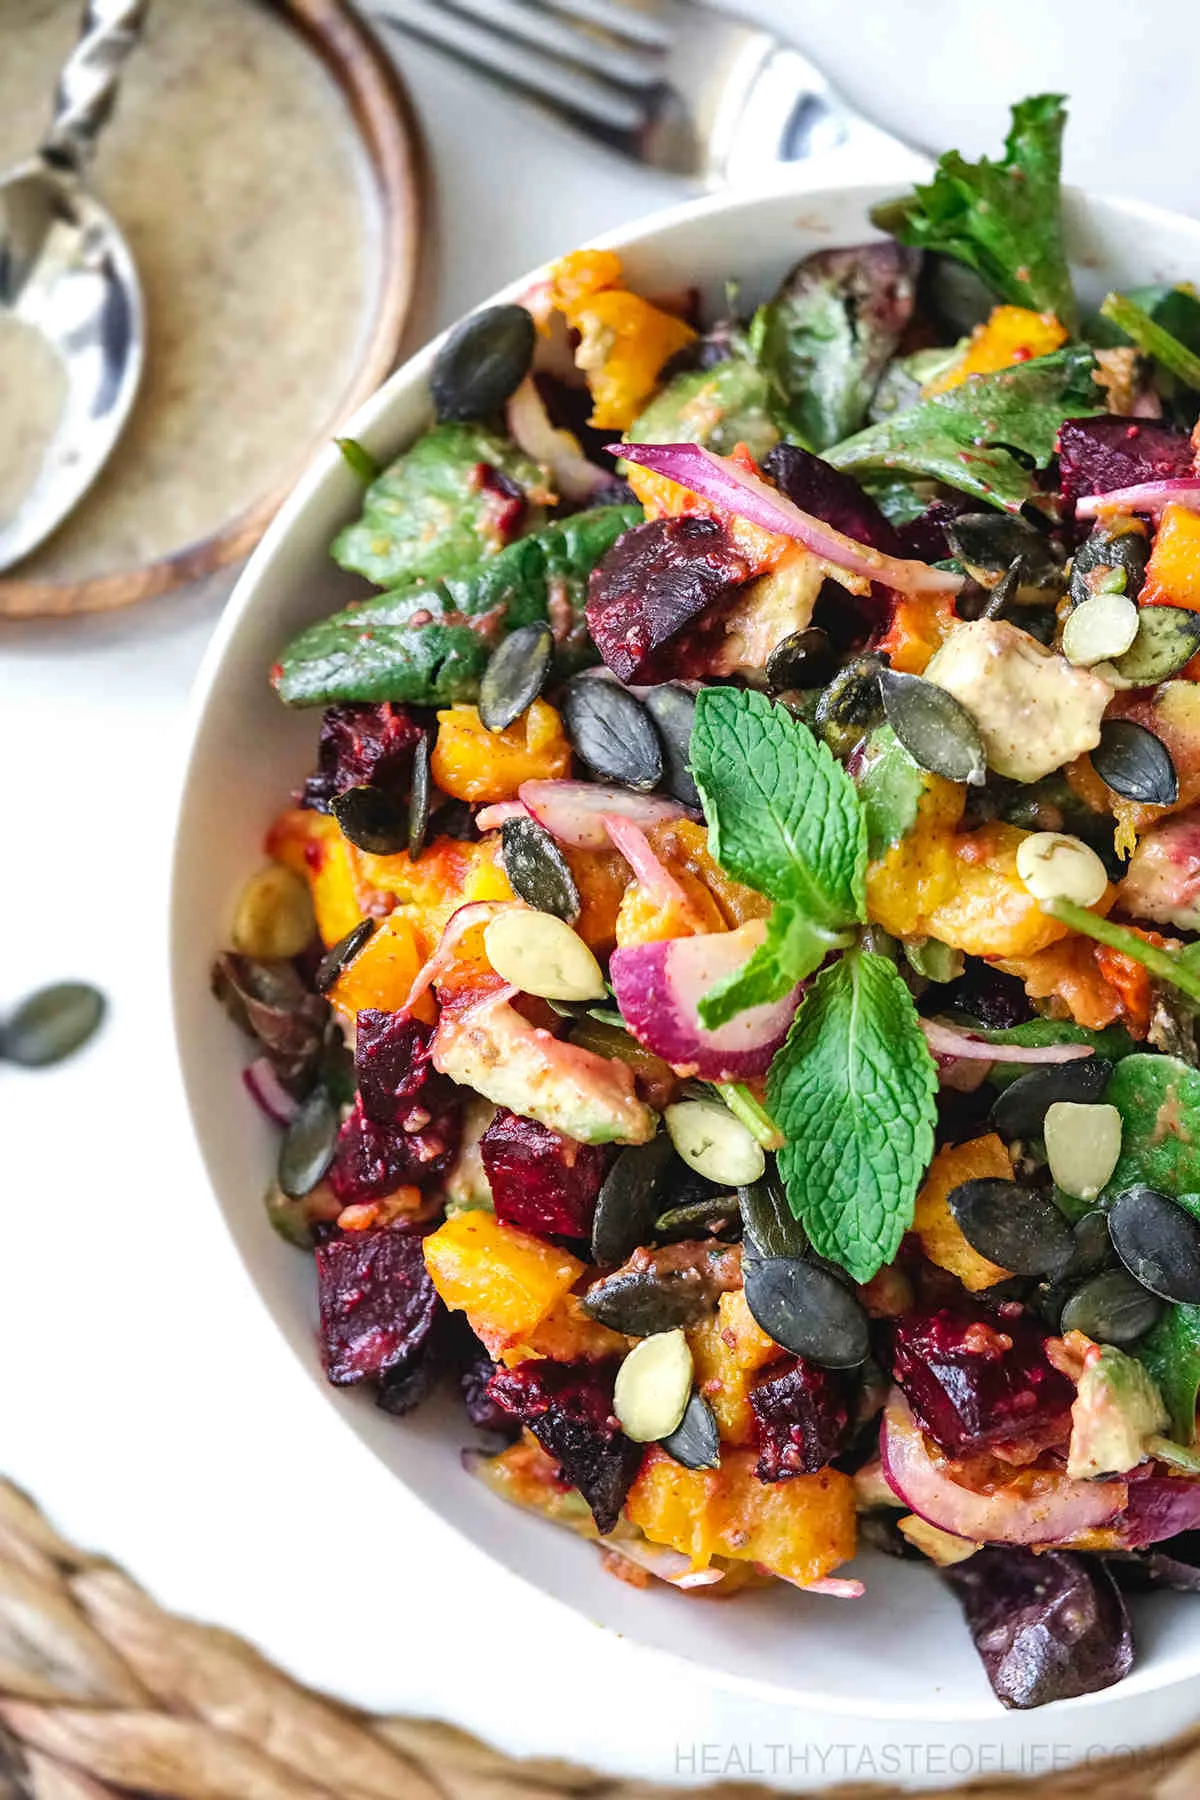 Beetroot and pumpkin salad recipe and dressing (vegan and gluten free).